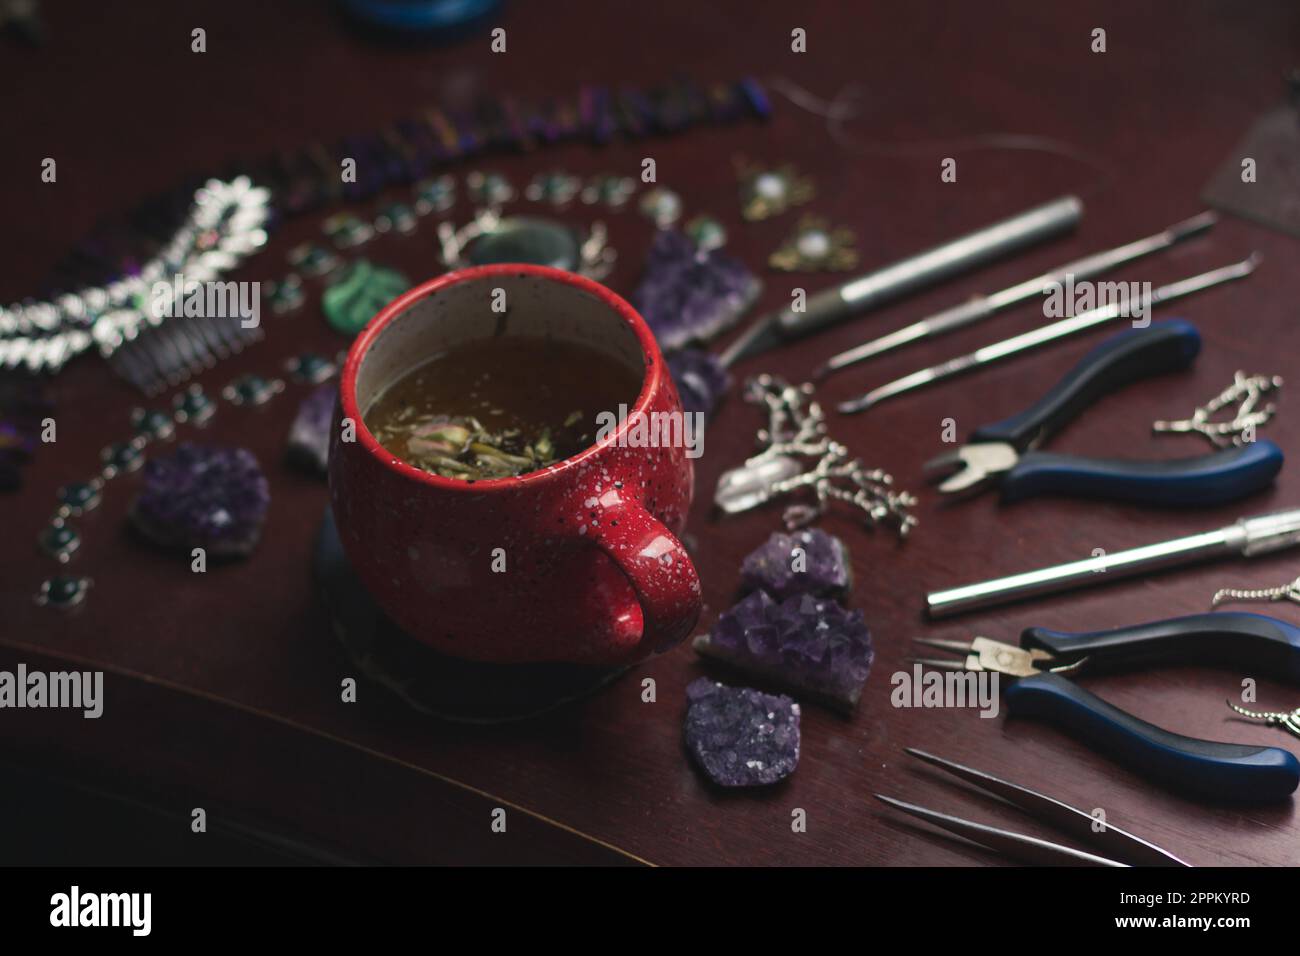 Close up jewelry maker herbal tea cup and tools concept photo Stock Photo